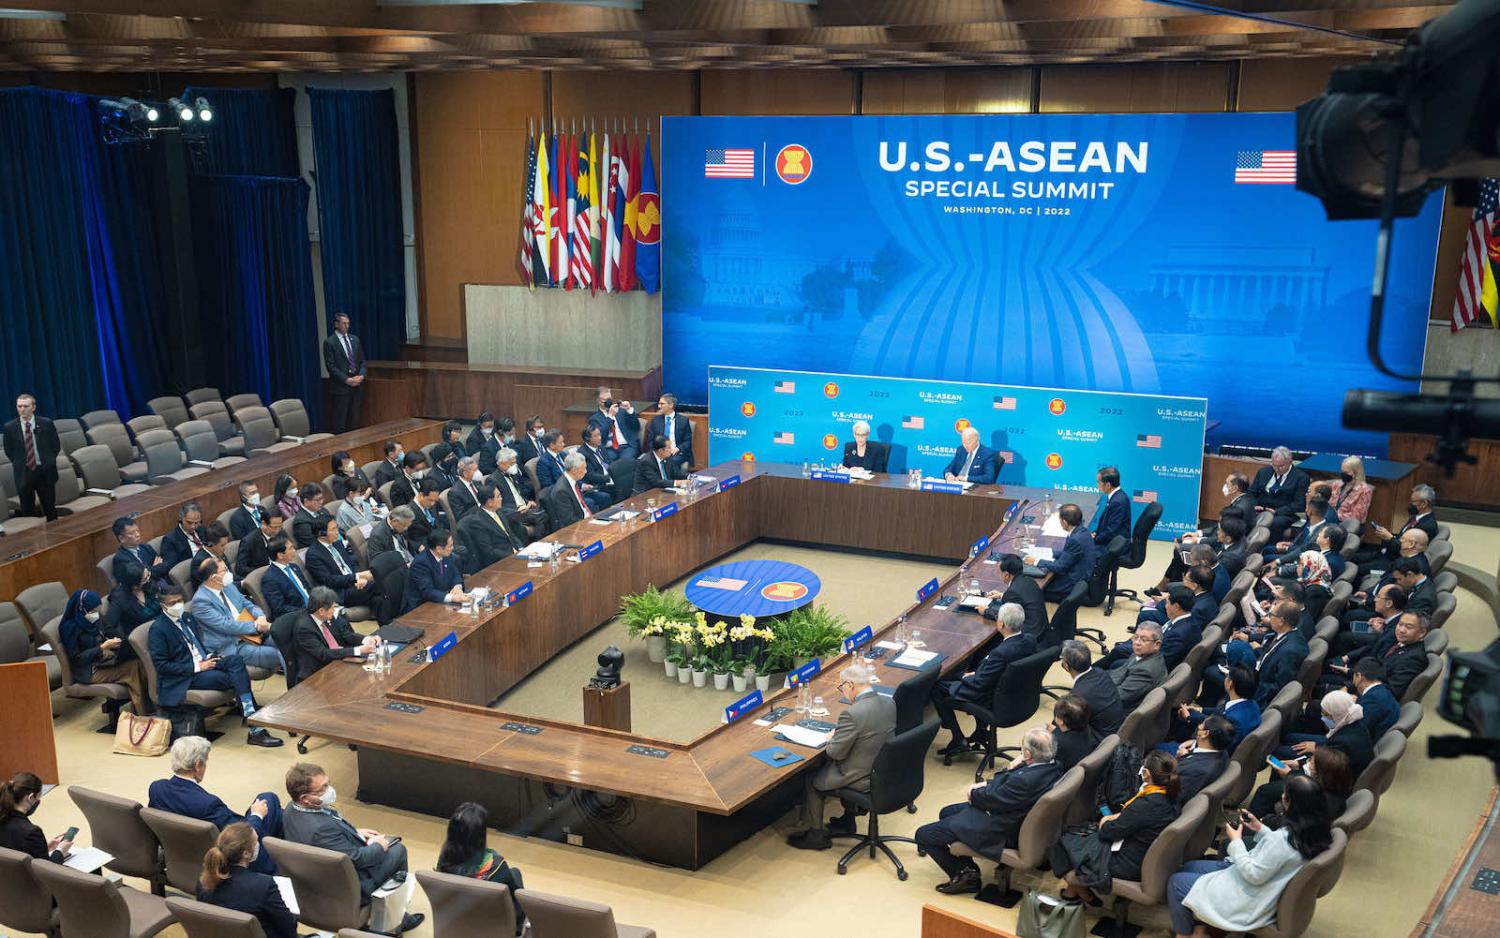 US President Joe Biden and Deputy Secretary of State Wendy Sherman hosting a session with Southeast Asian leaders during the US-ASEAN Special Summit in Washington, 13 May (Freddie Everett/State Department via Flickr)